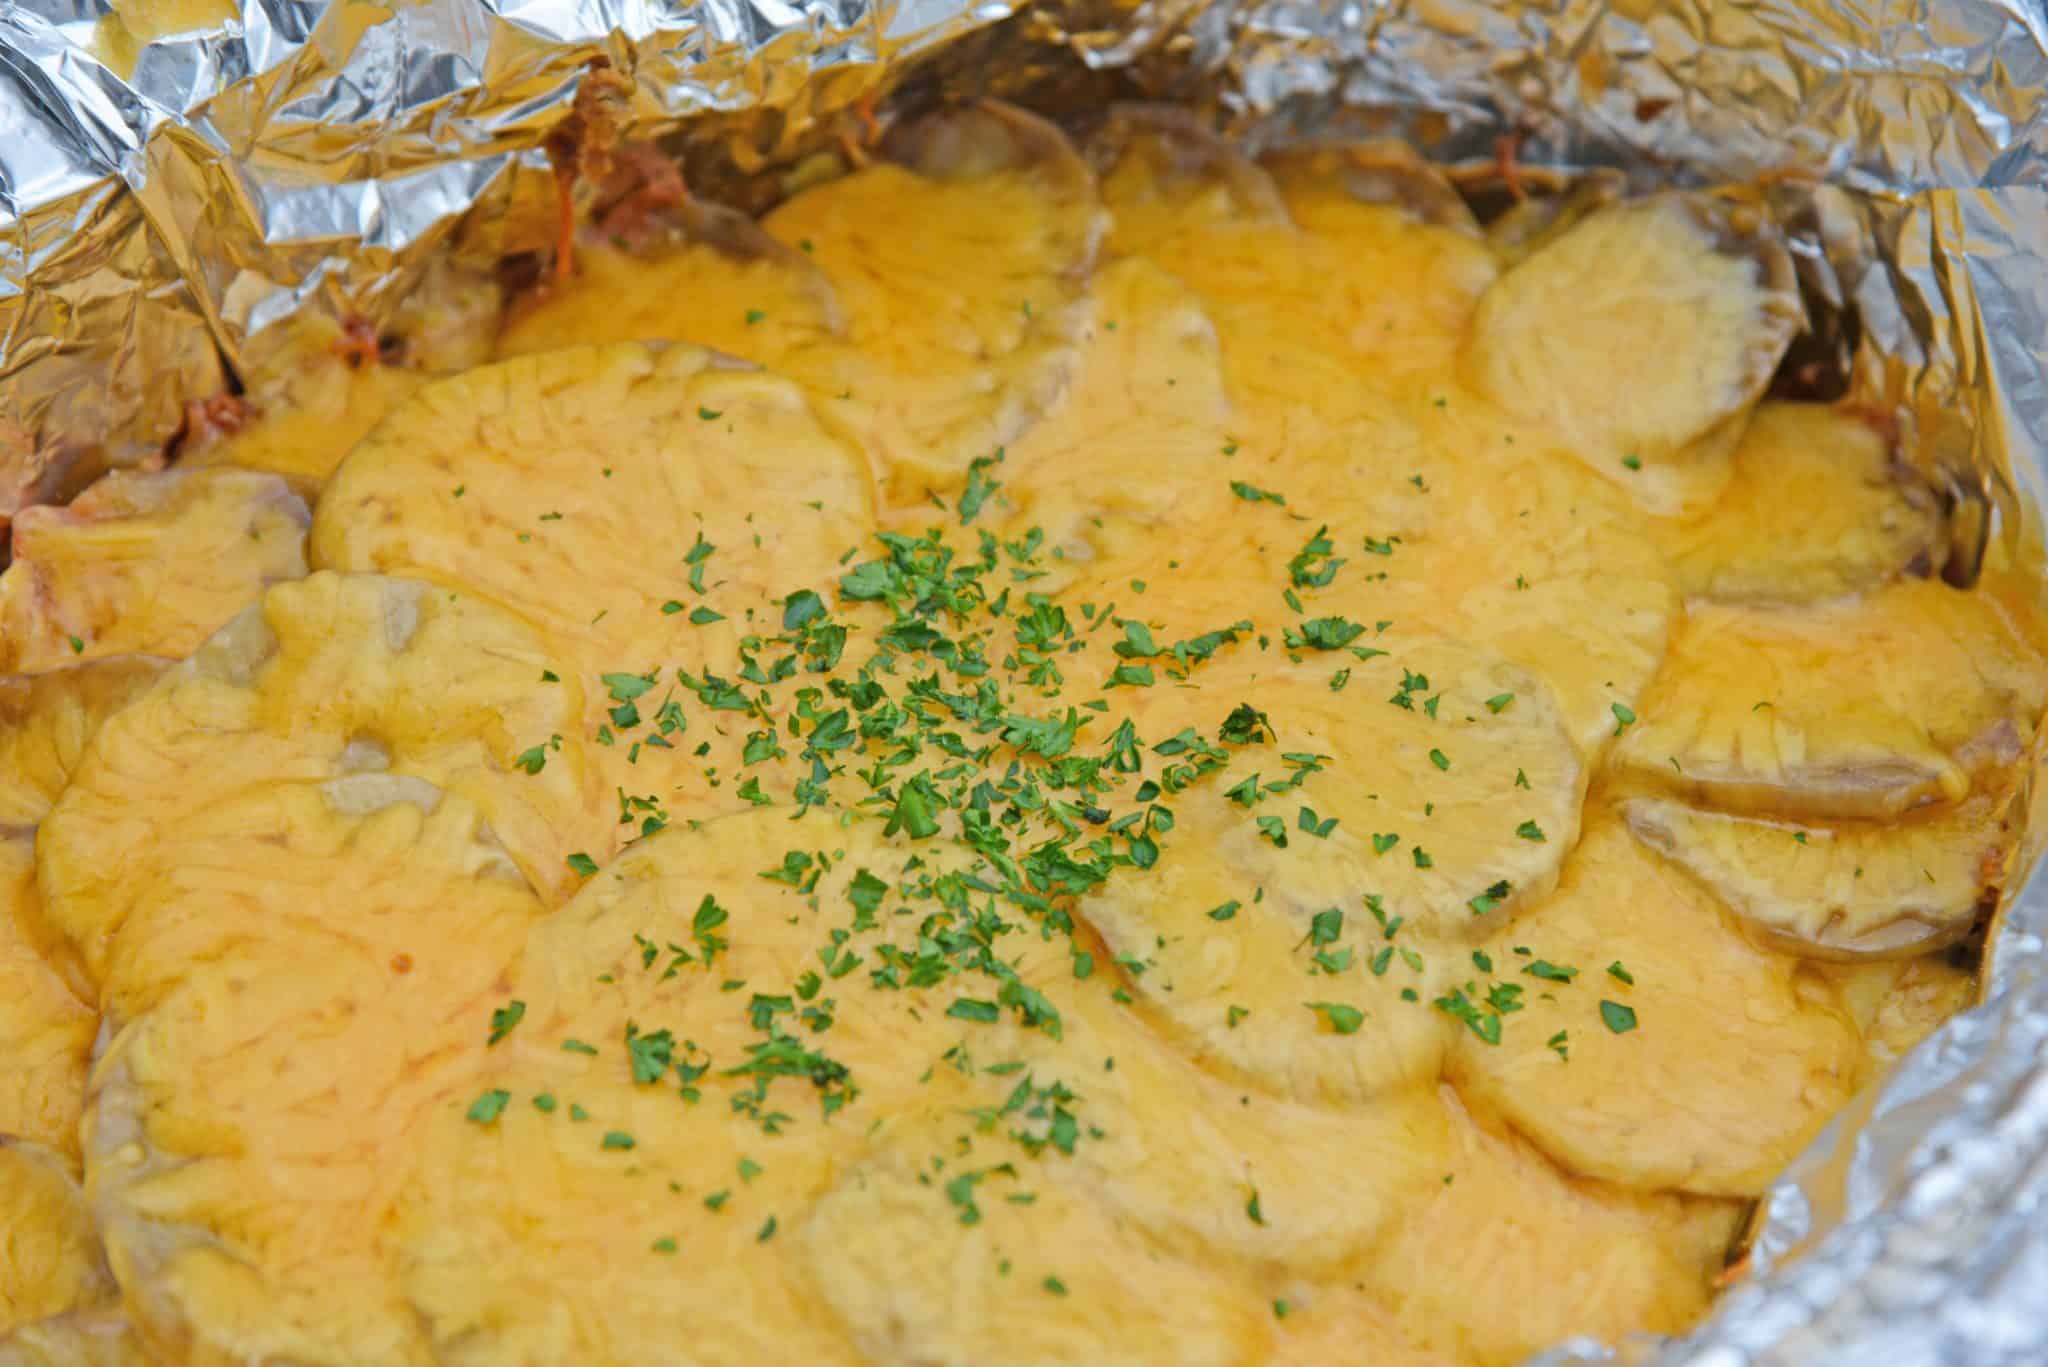 Slow Cooker Potatoes au Gratin are an amazing copycat recipe of Fleming's Steakhouse's potatoes.  Pop it in your slow cooker and reap the cheesy benefits. #slowcookerpotatoesaugratin #potatoesaugratin www.savoryexperiments.com